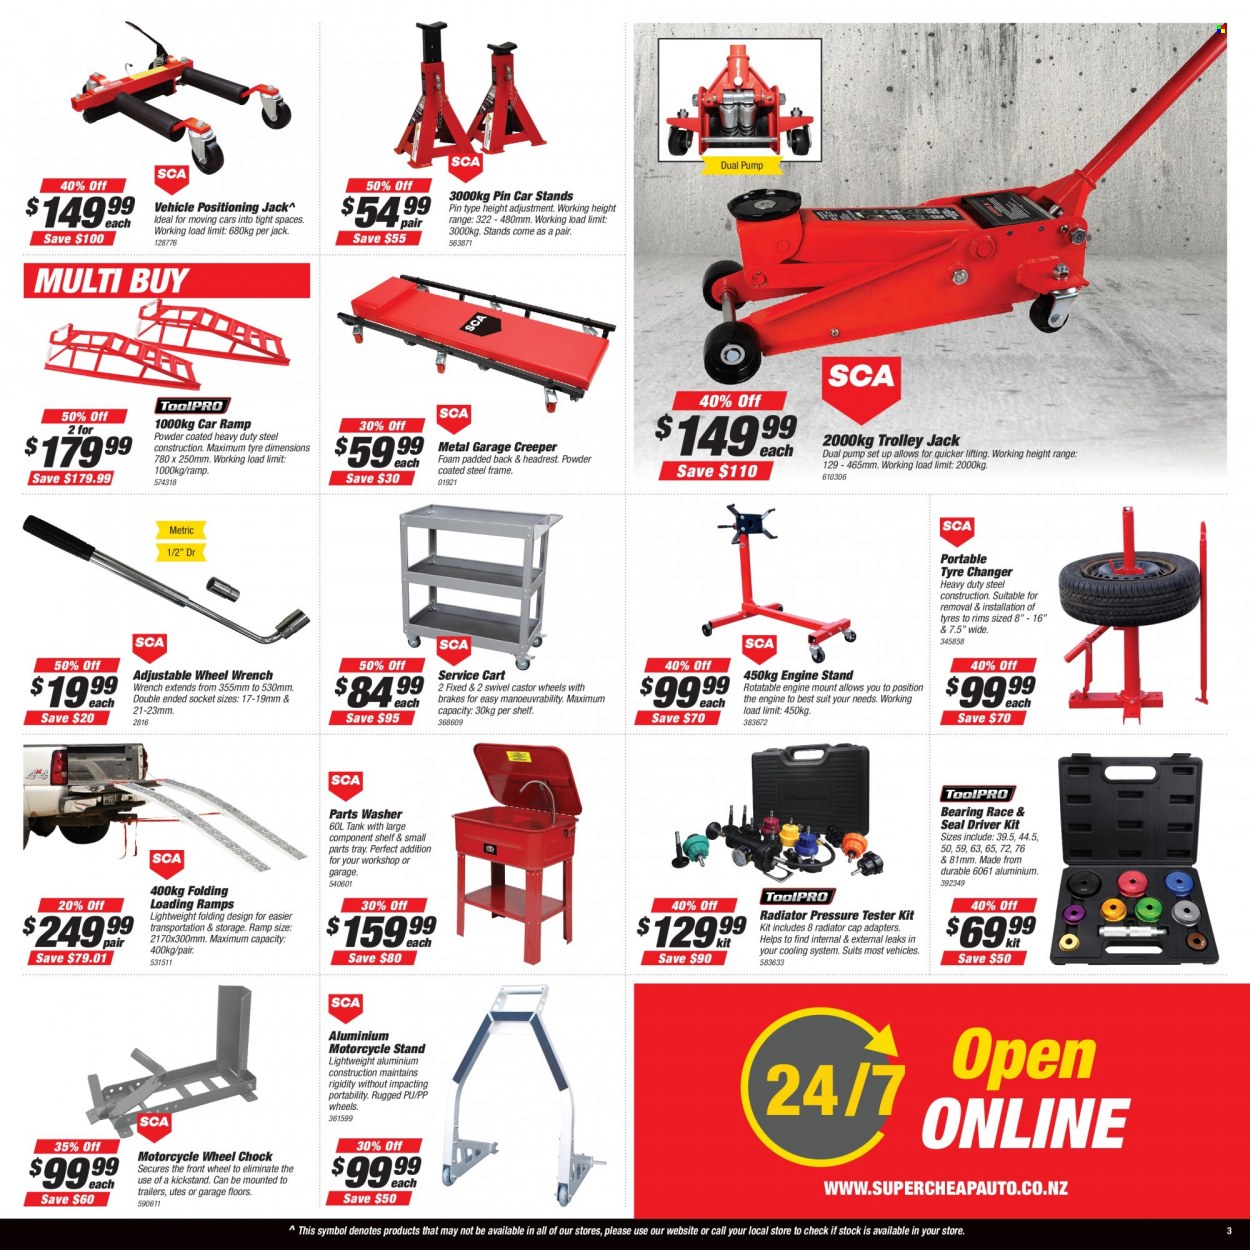 thumbnail - SuperCheap Auto mailer - 25.11.2021 - 05.12.2021 - Sales products - trolley, cart, tank, motorcycle, car ramps, tyre changer, vehicle positioning jack, tires. Page 3.